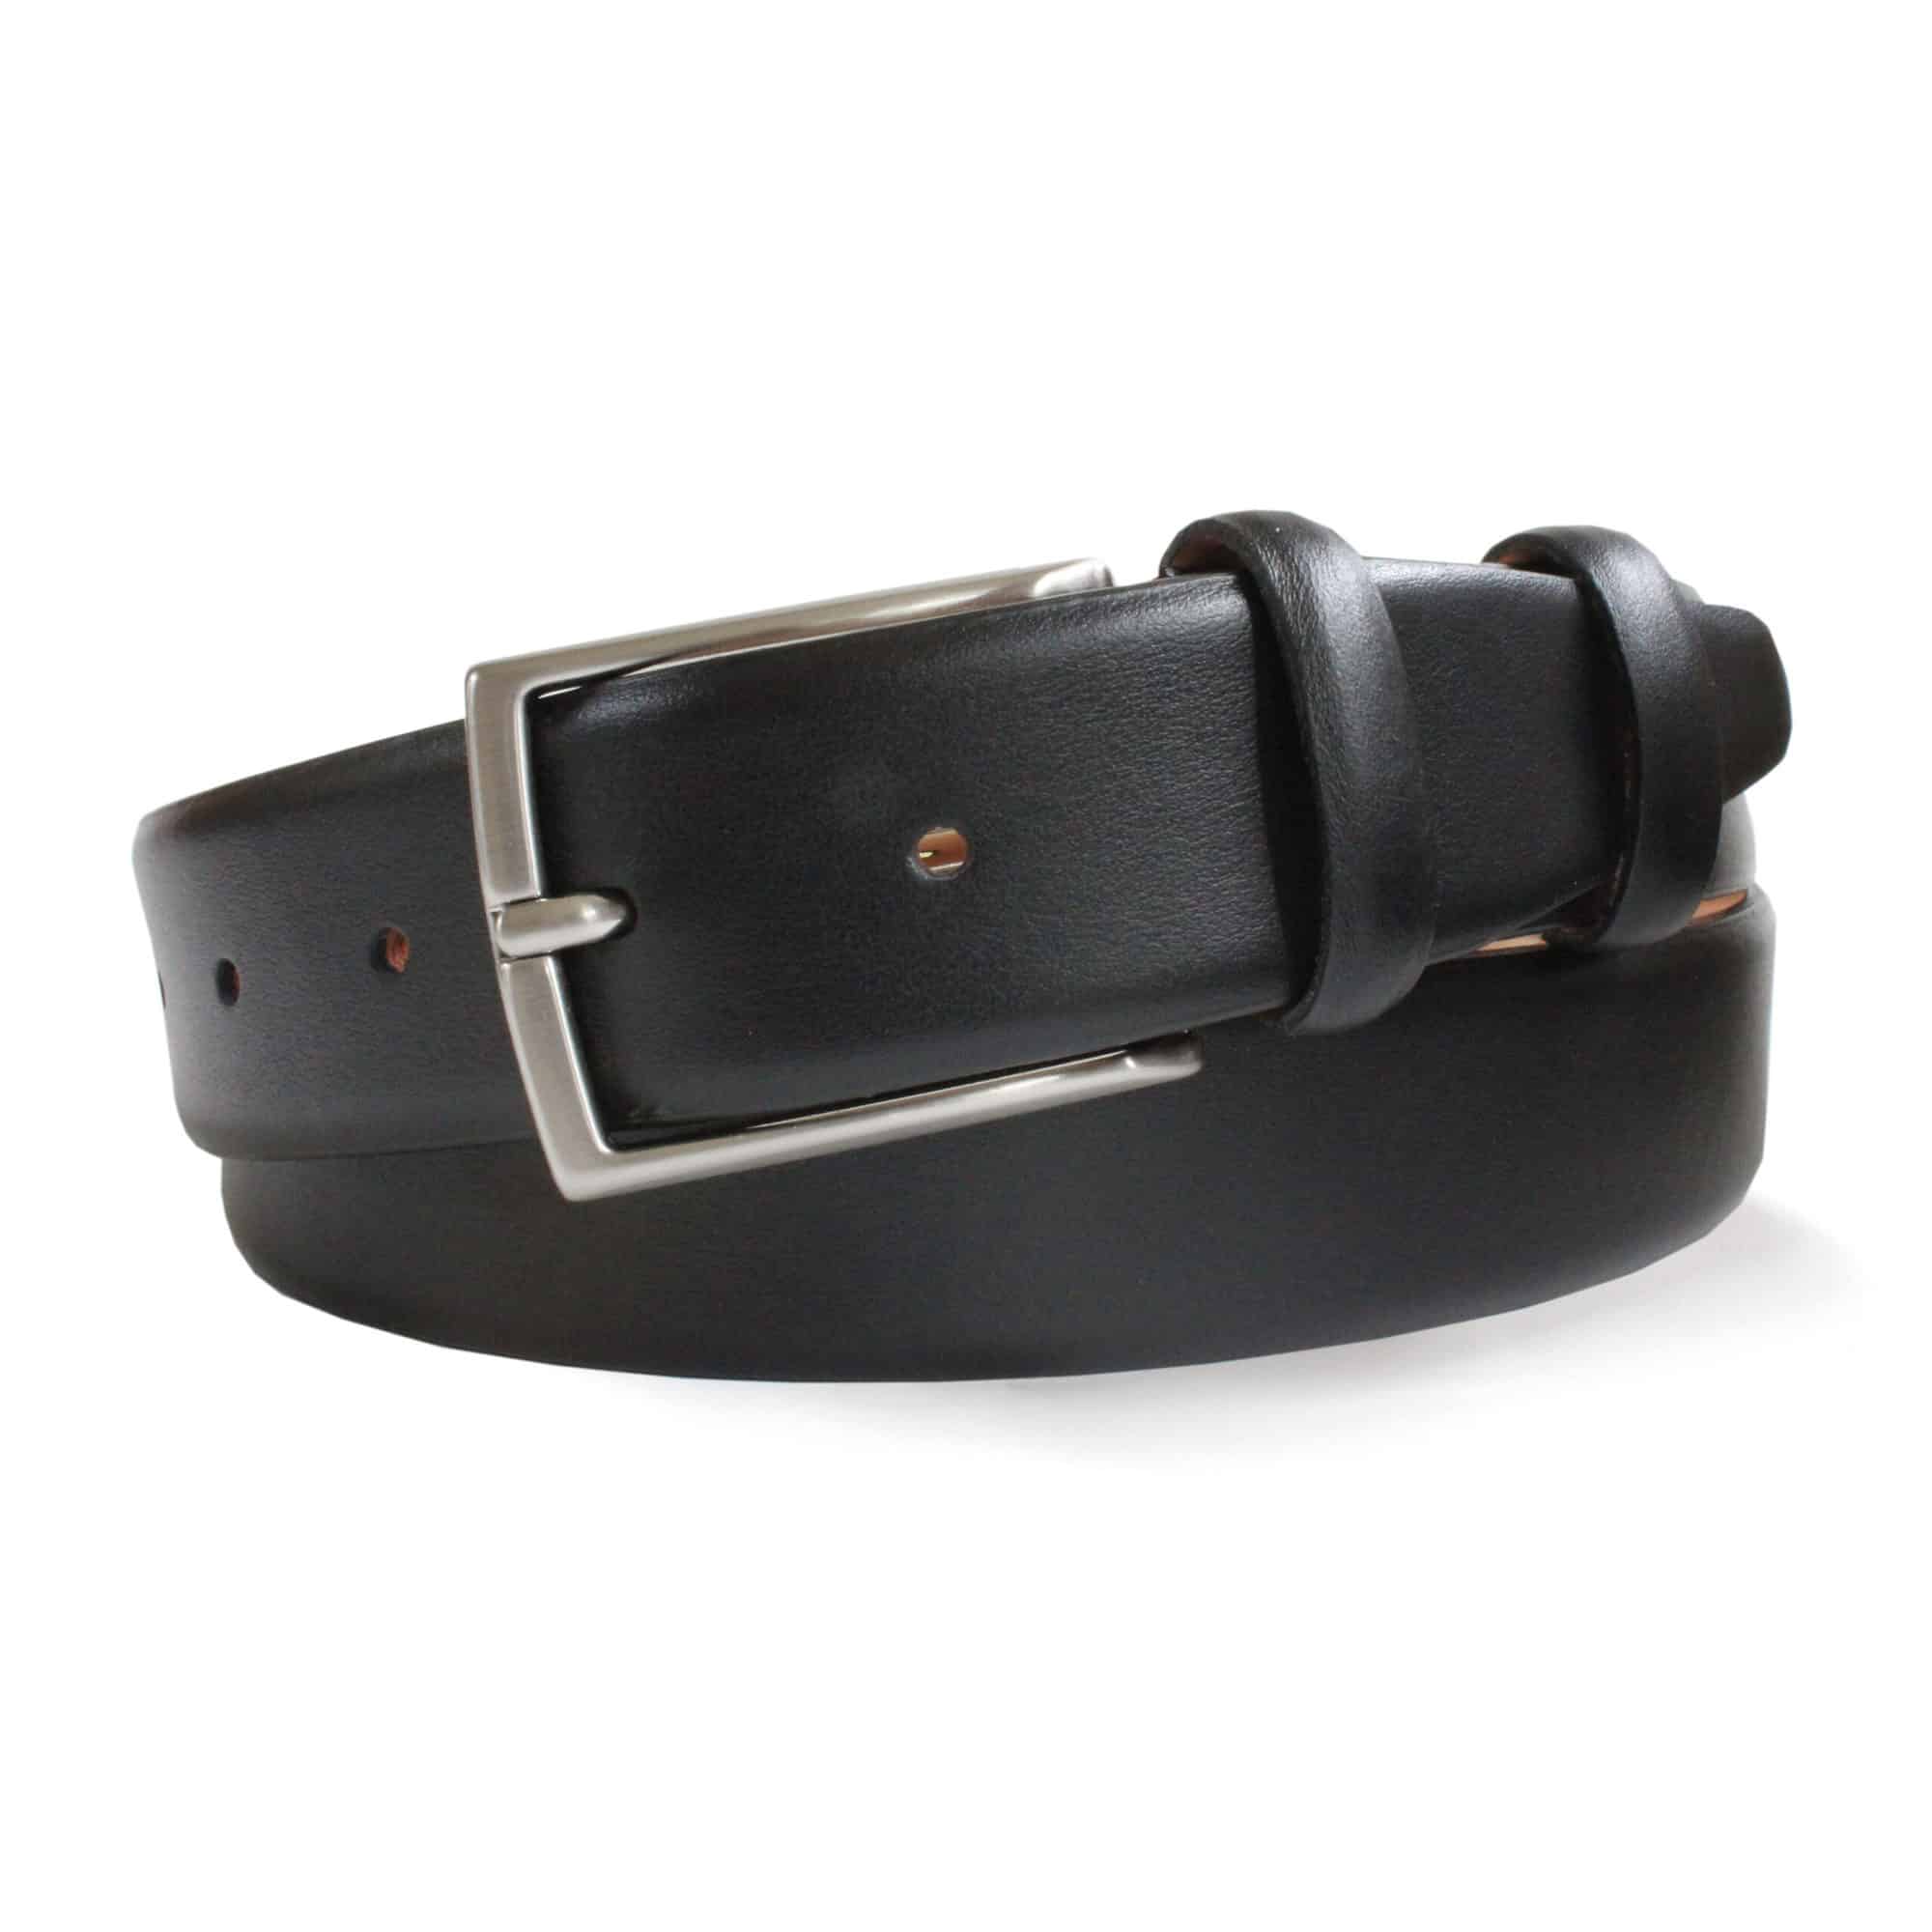 Black Feather Edge Belt by Smart Clothes York Yorkshire